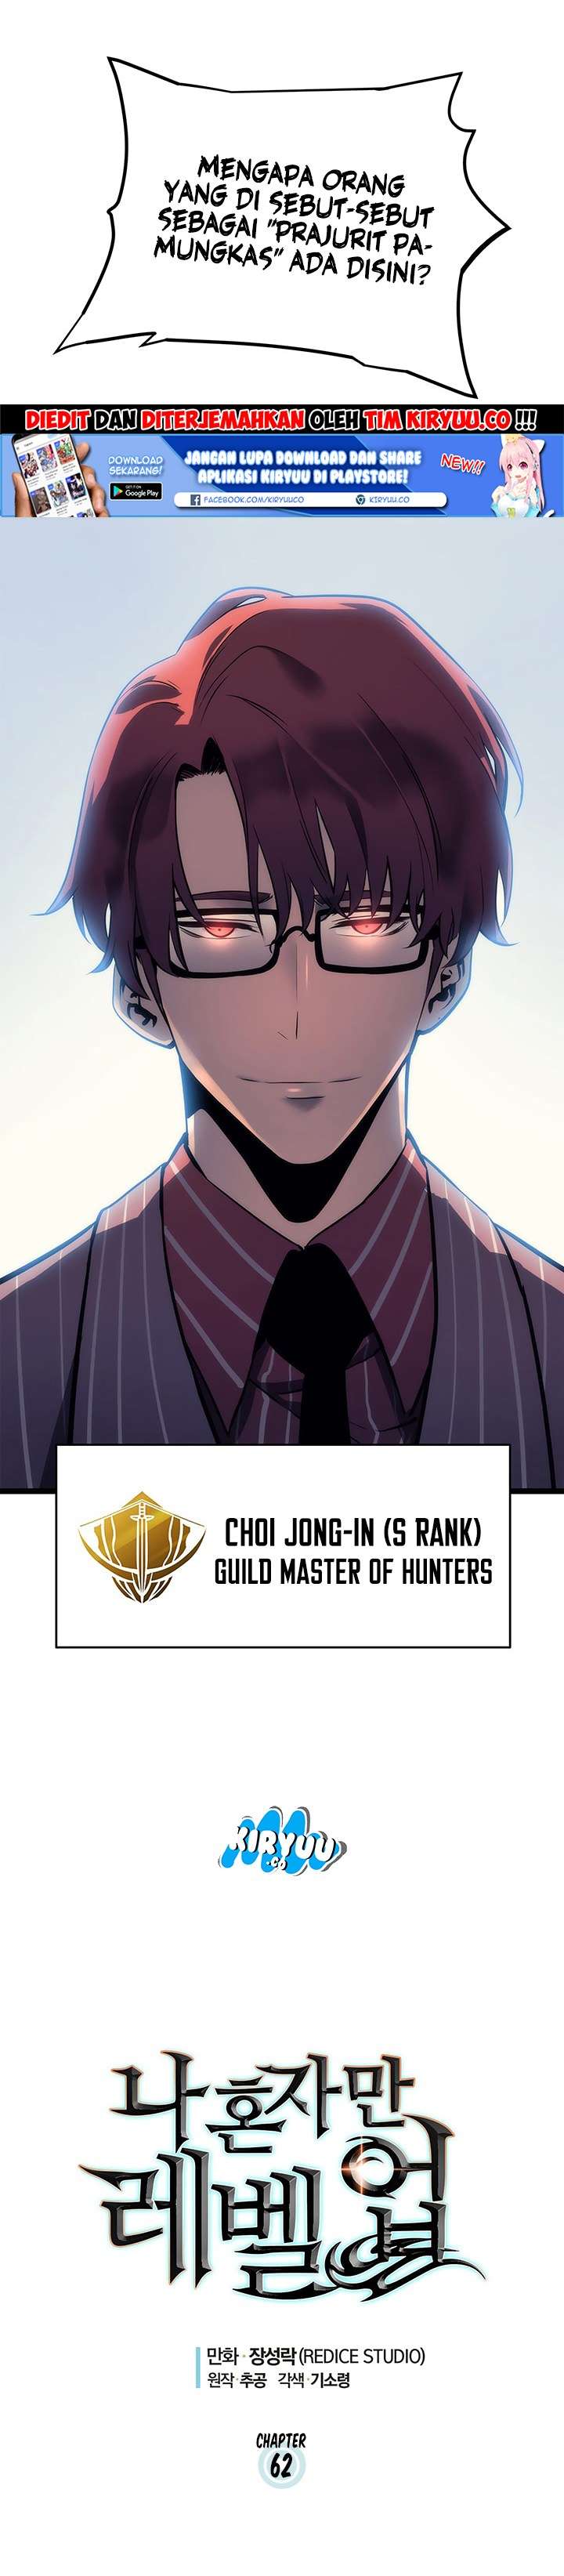 Solo Leveling Chapter 63 Image 3